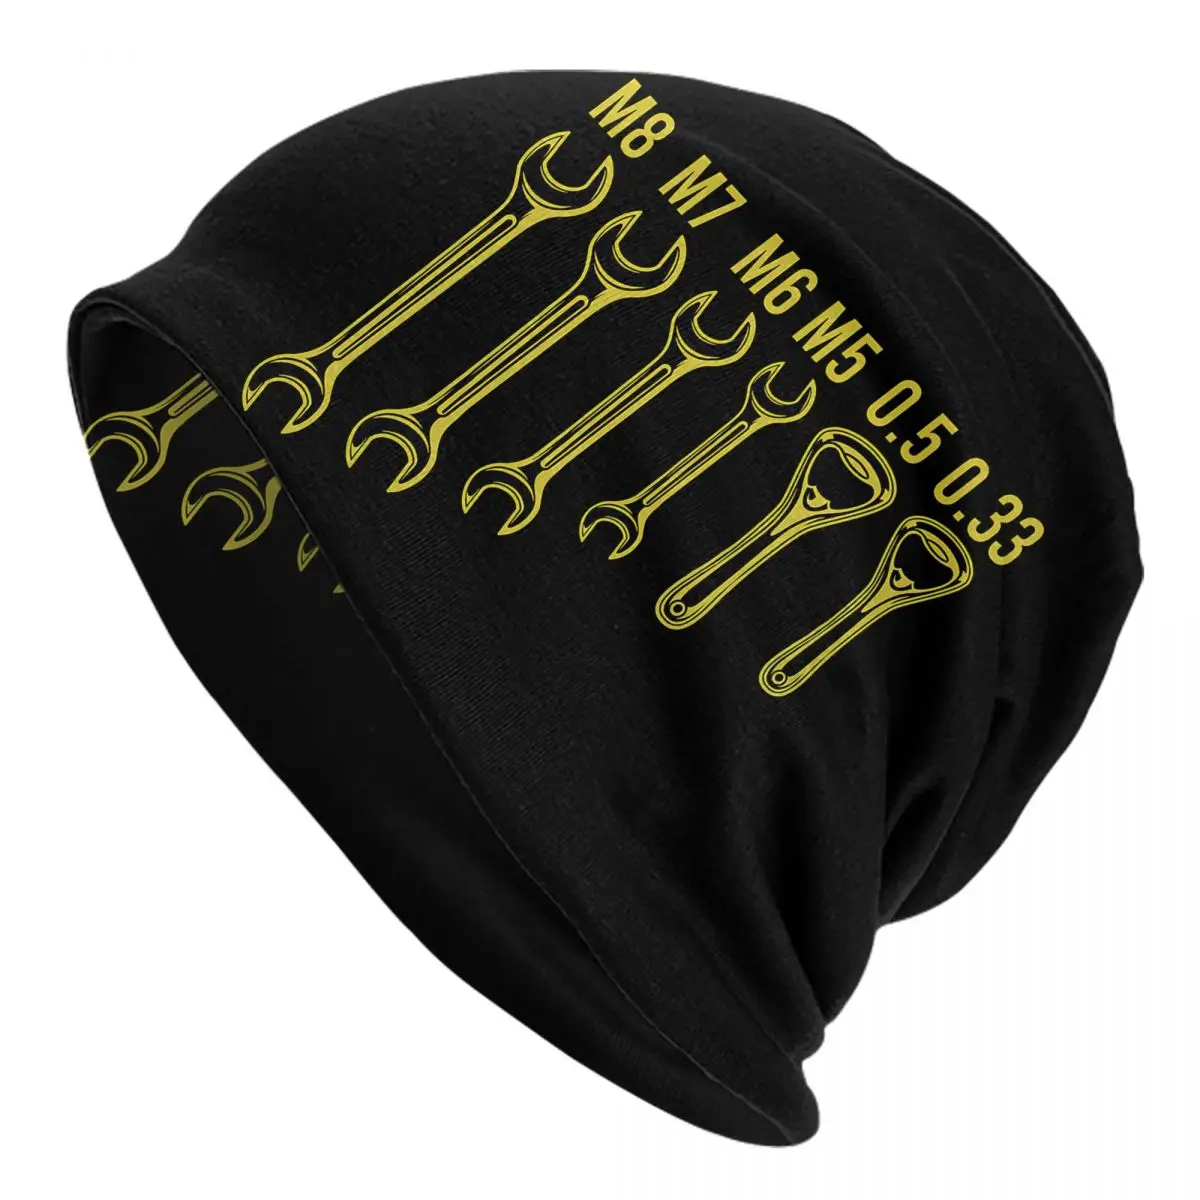 Screwdriver Wrench Workshop Car Mechanic Gift Adult Men's Women's Knit Hat Keep warm winter Funny knitted hat